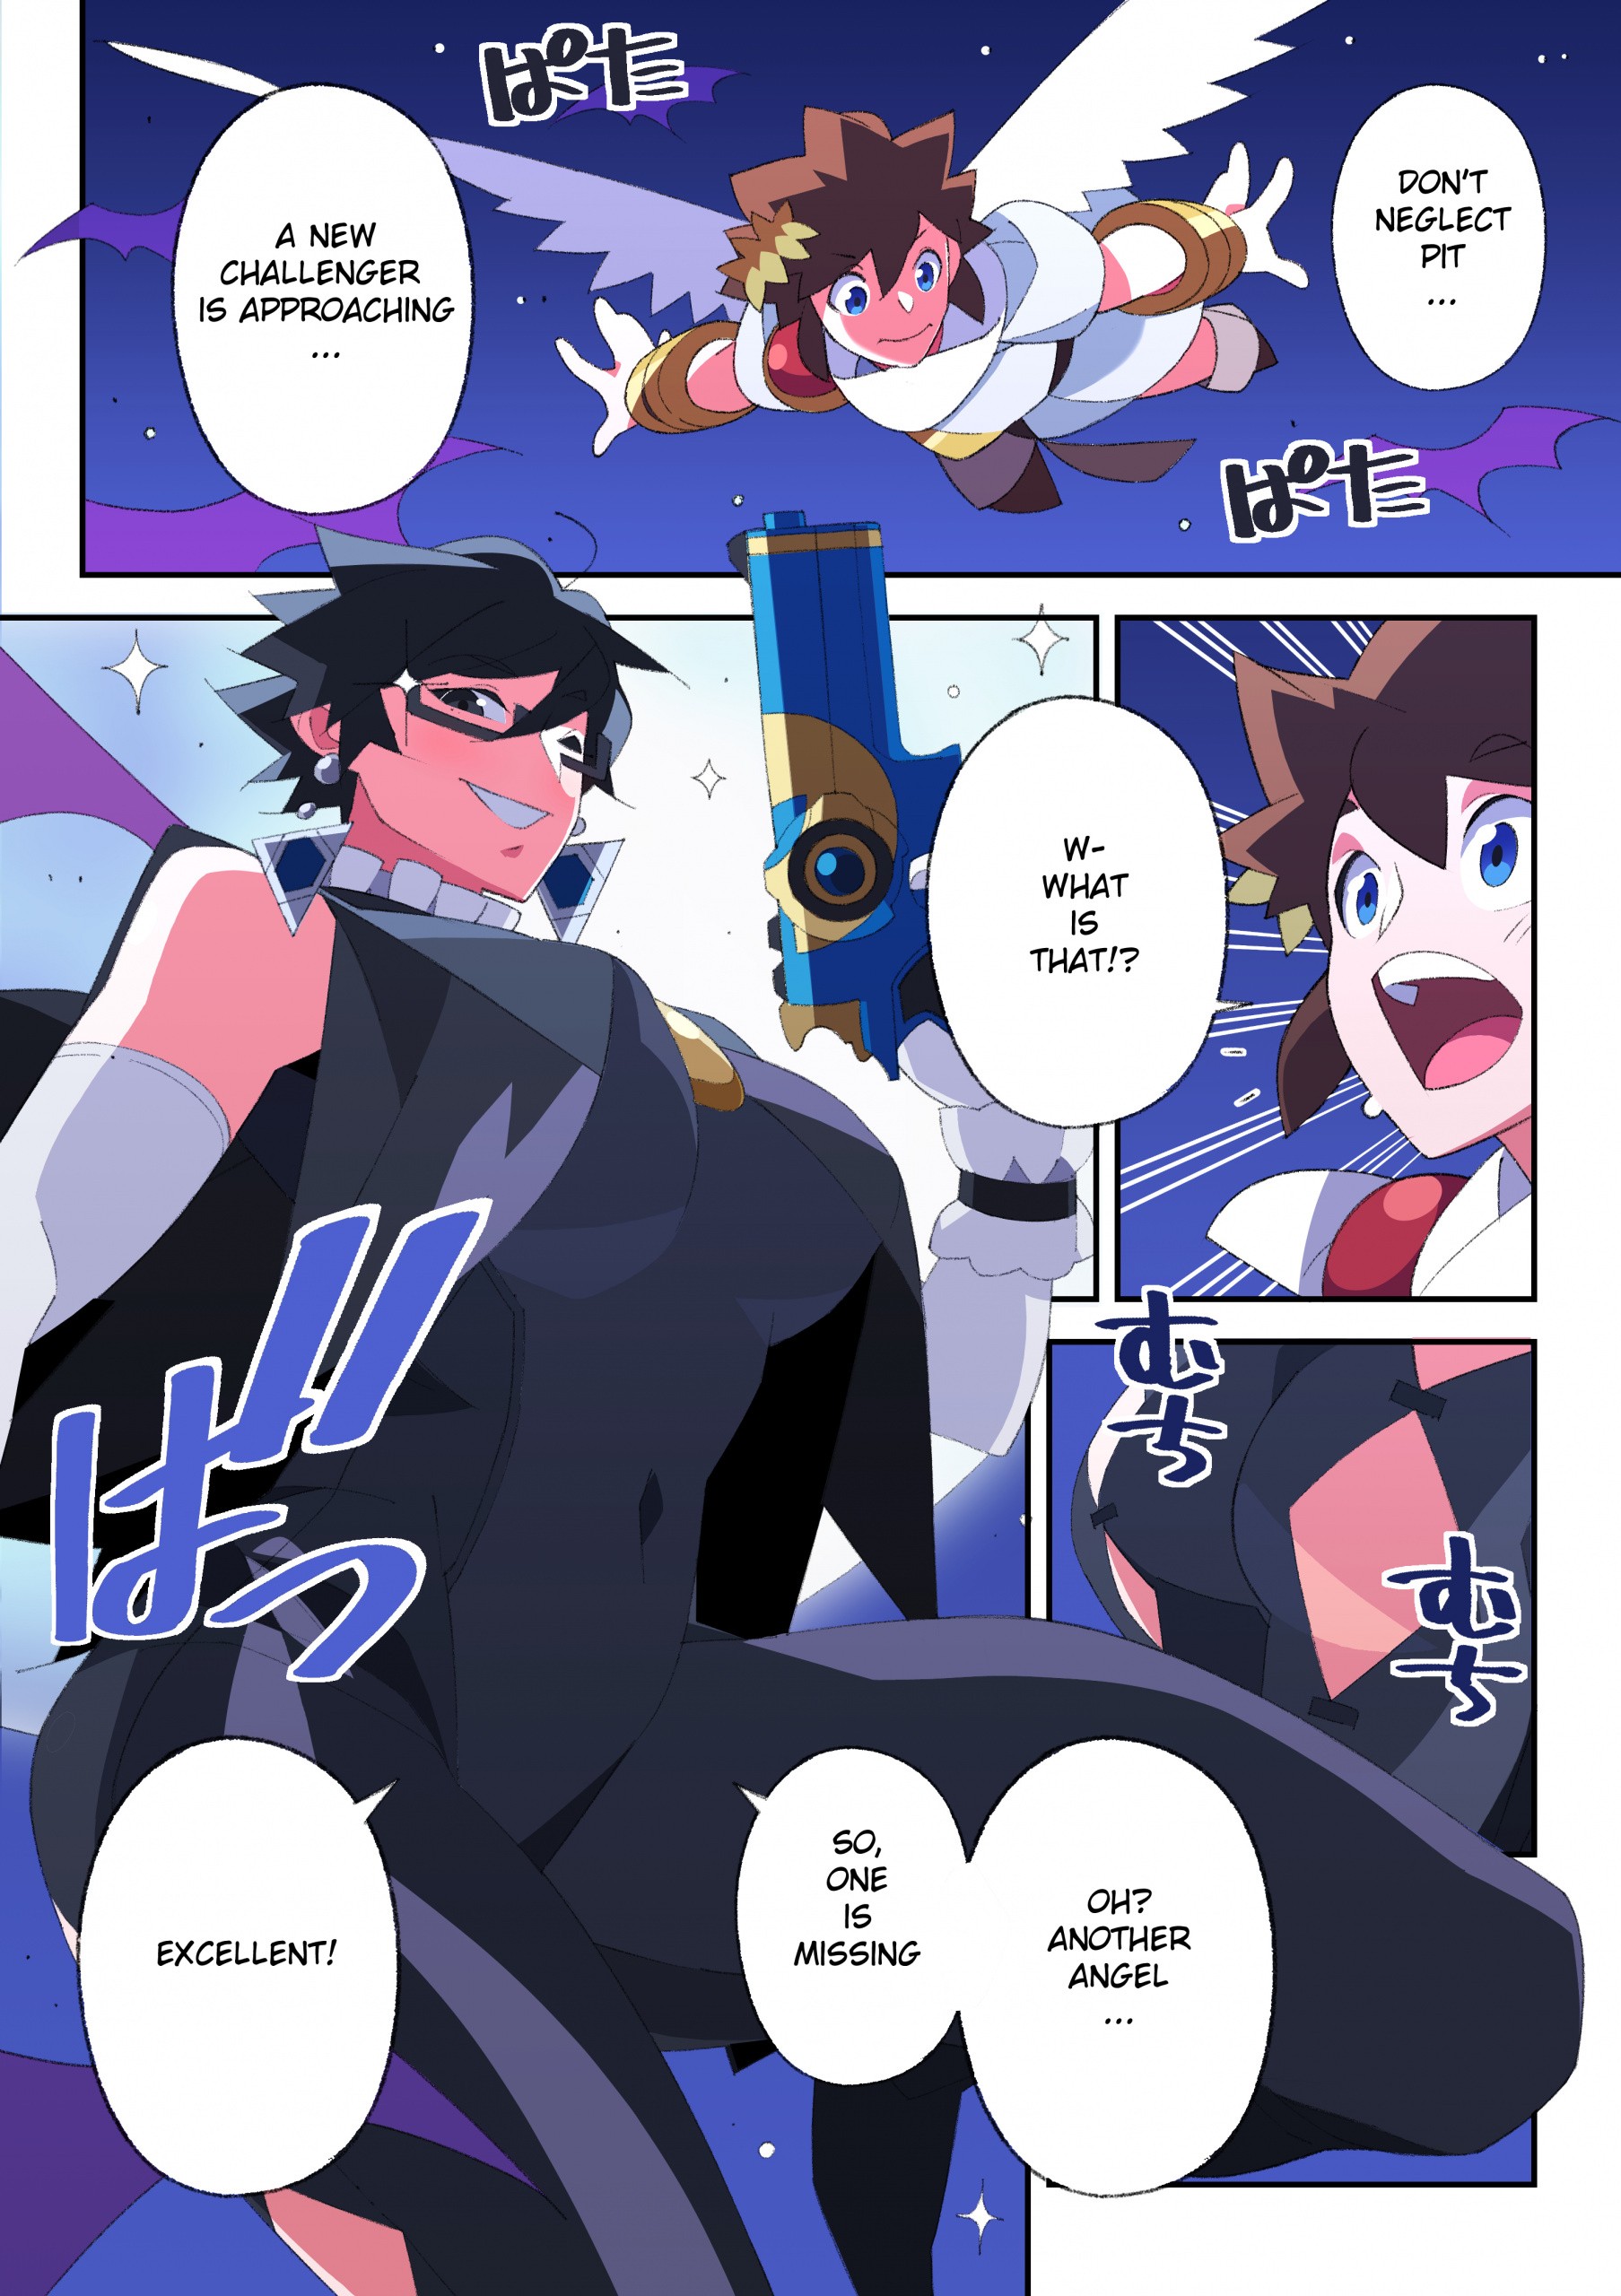 Let's Dance Boy! hentai manga picture 3